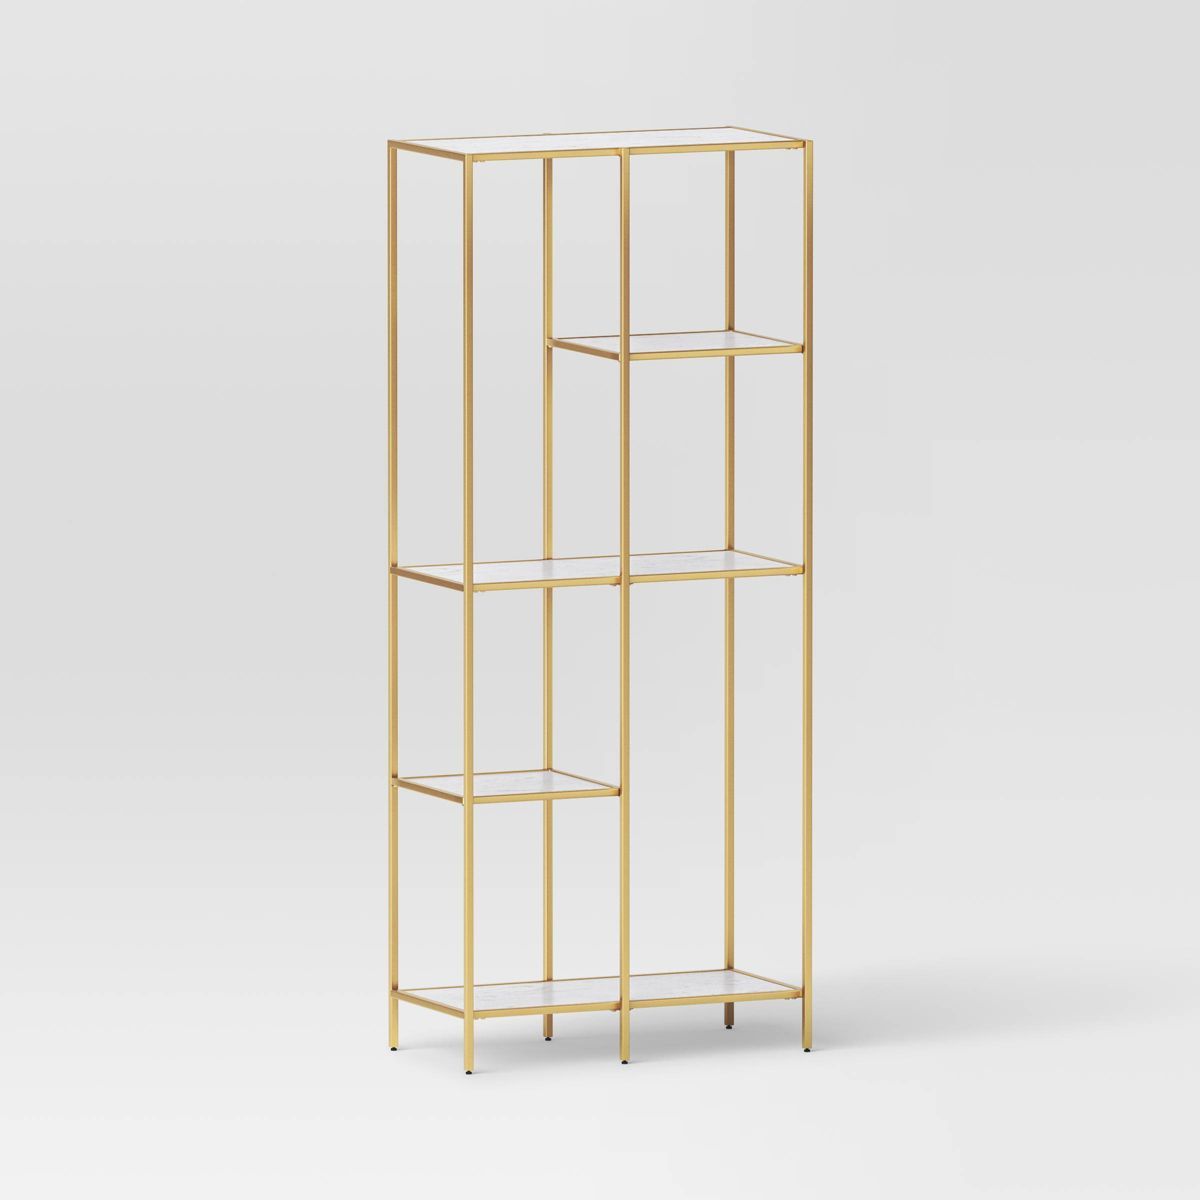 72" 3 Shelves Faux Marble and Metal Book Rack Gold - Threshold™ | Target